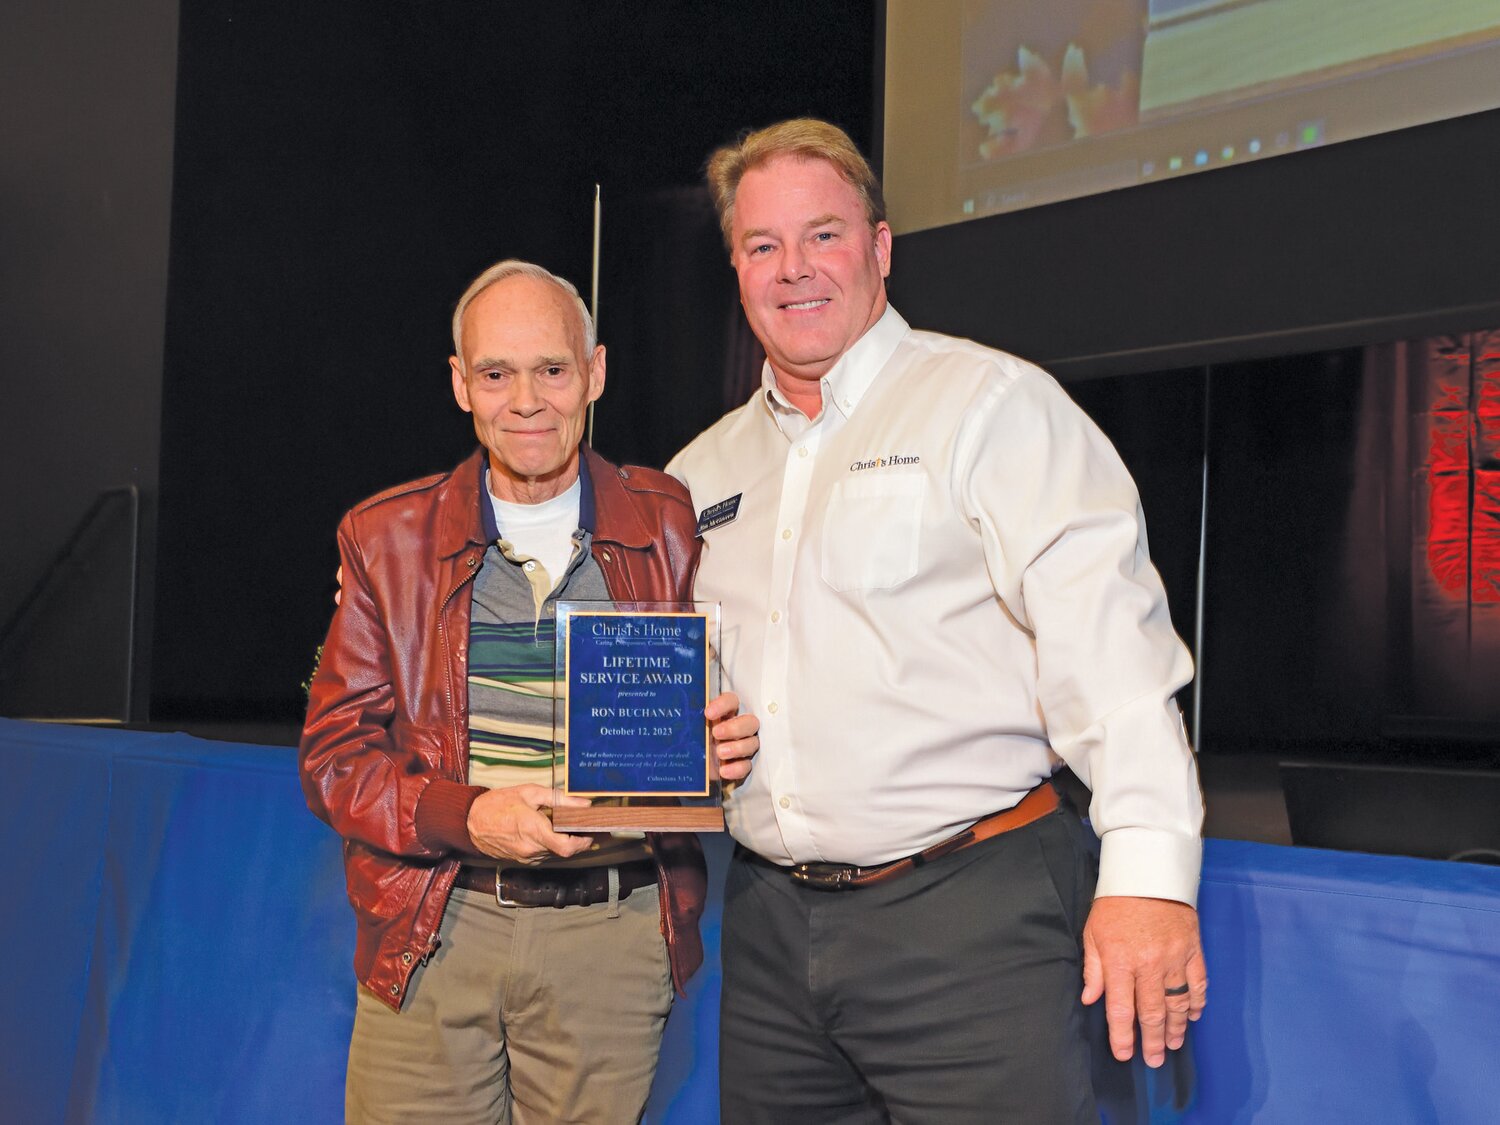 Christ’s Home
Children’s Campus Maintenance Director Ron Buchanan accepts a “Lifetime Service Awards” plaque from Jim McGovern, senior vice president and chief operating officer.